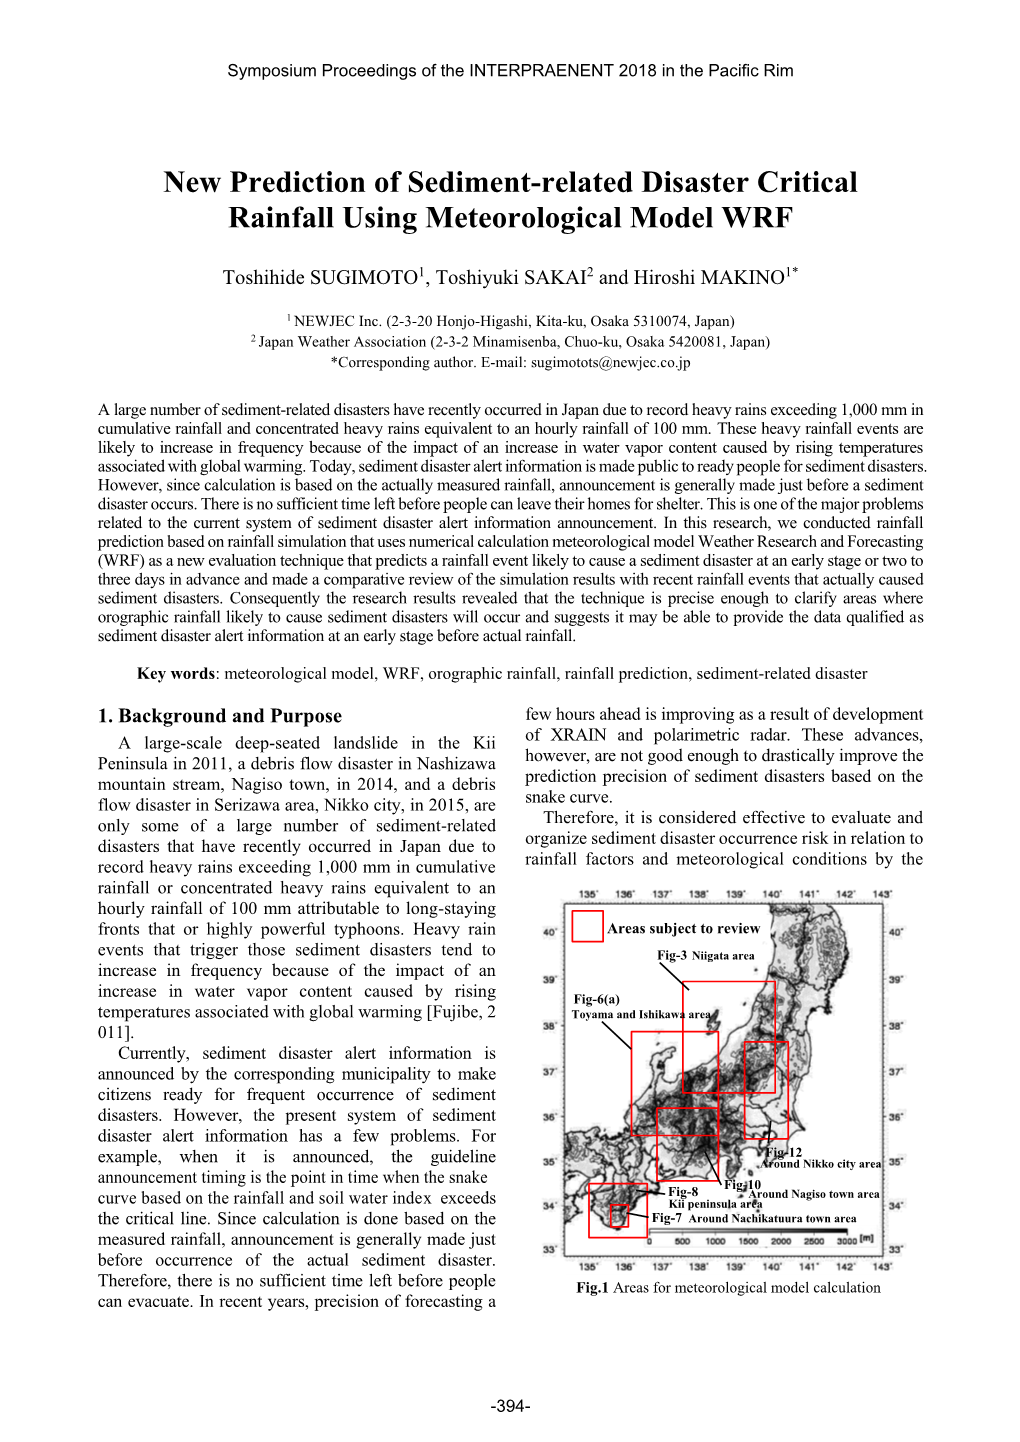 New Prediction of Sediment-Related Disaster Critical Rainfall Using Meteorological Model WRF